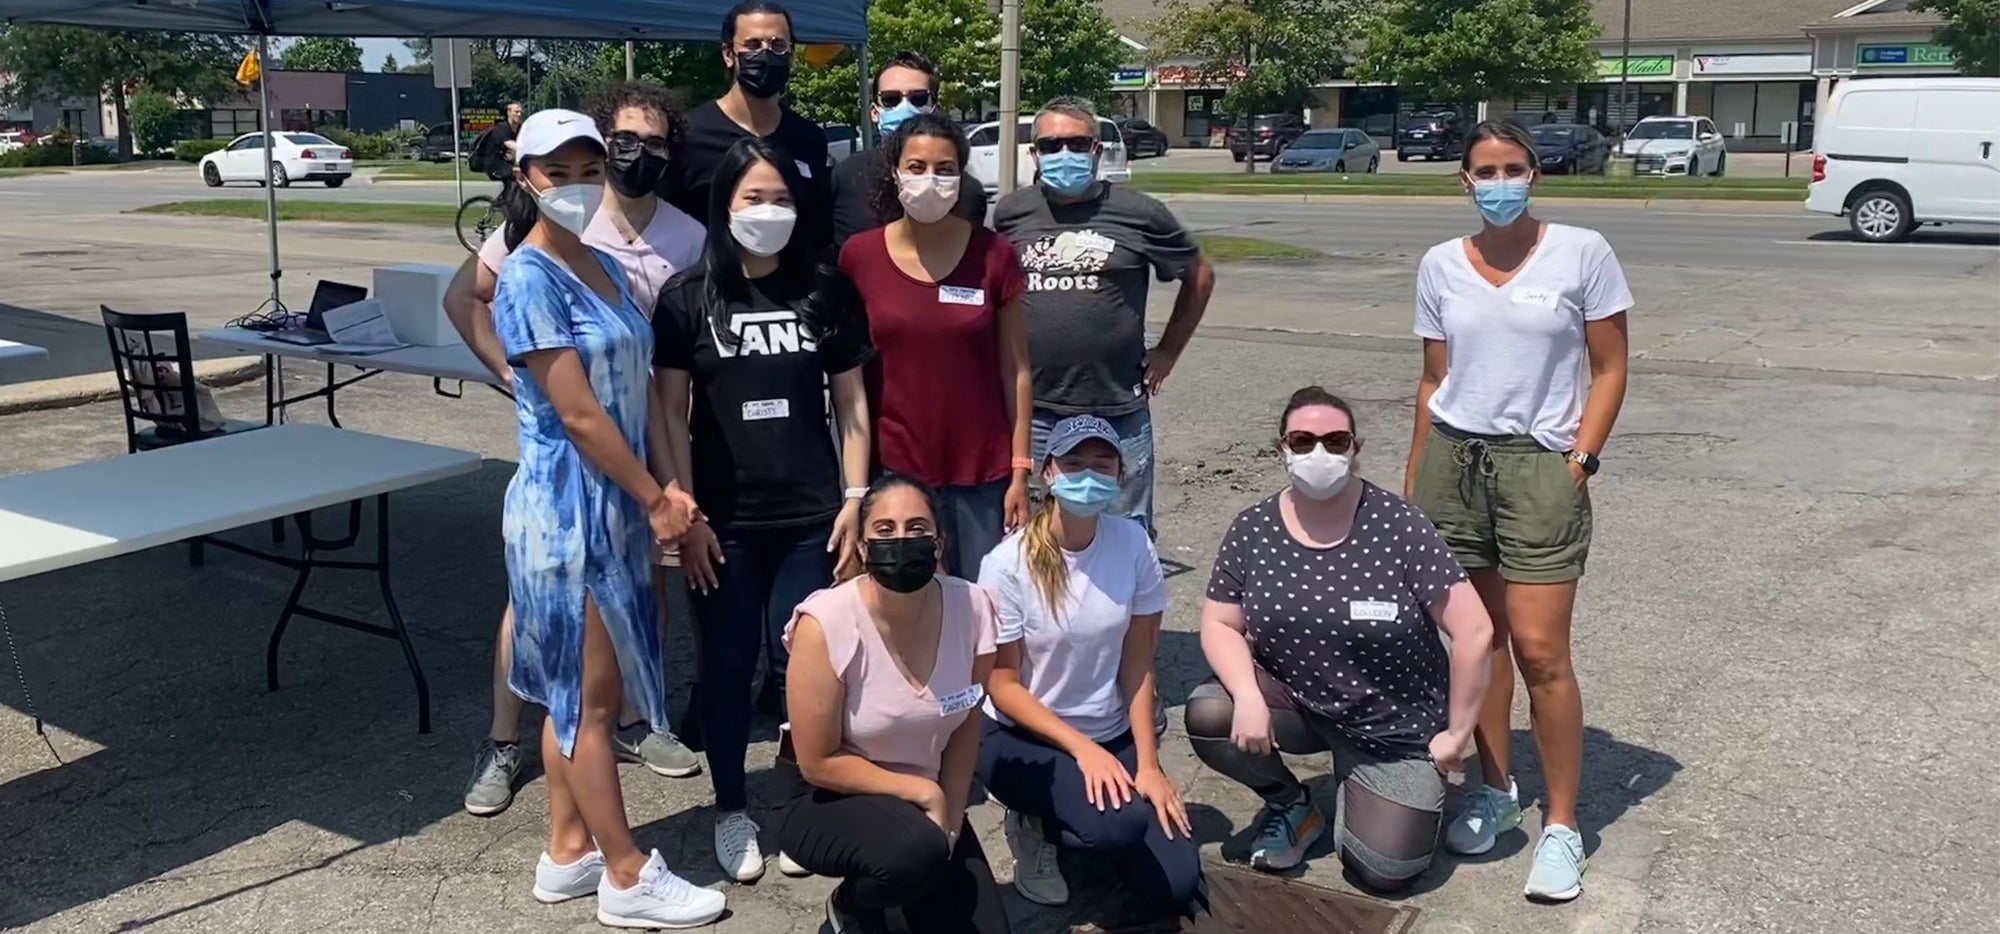 The team that ran the clinic smiling and wearing masks in a parking lot